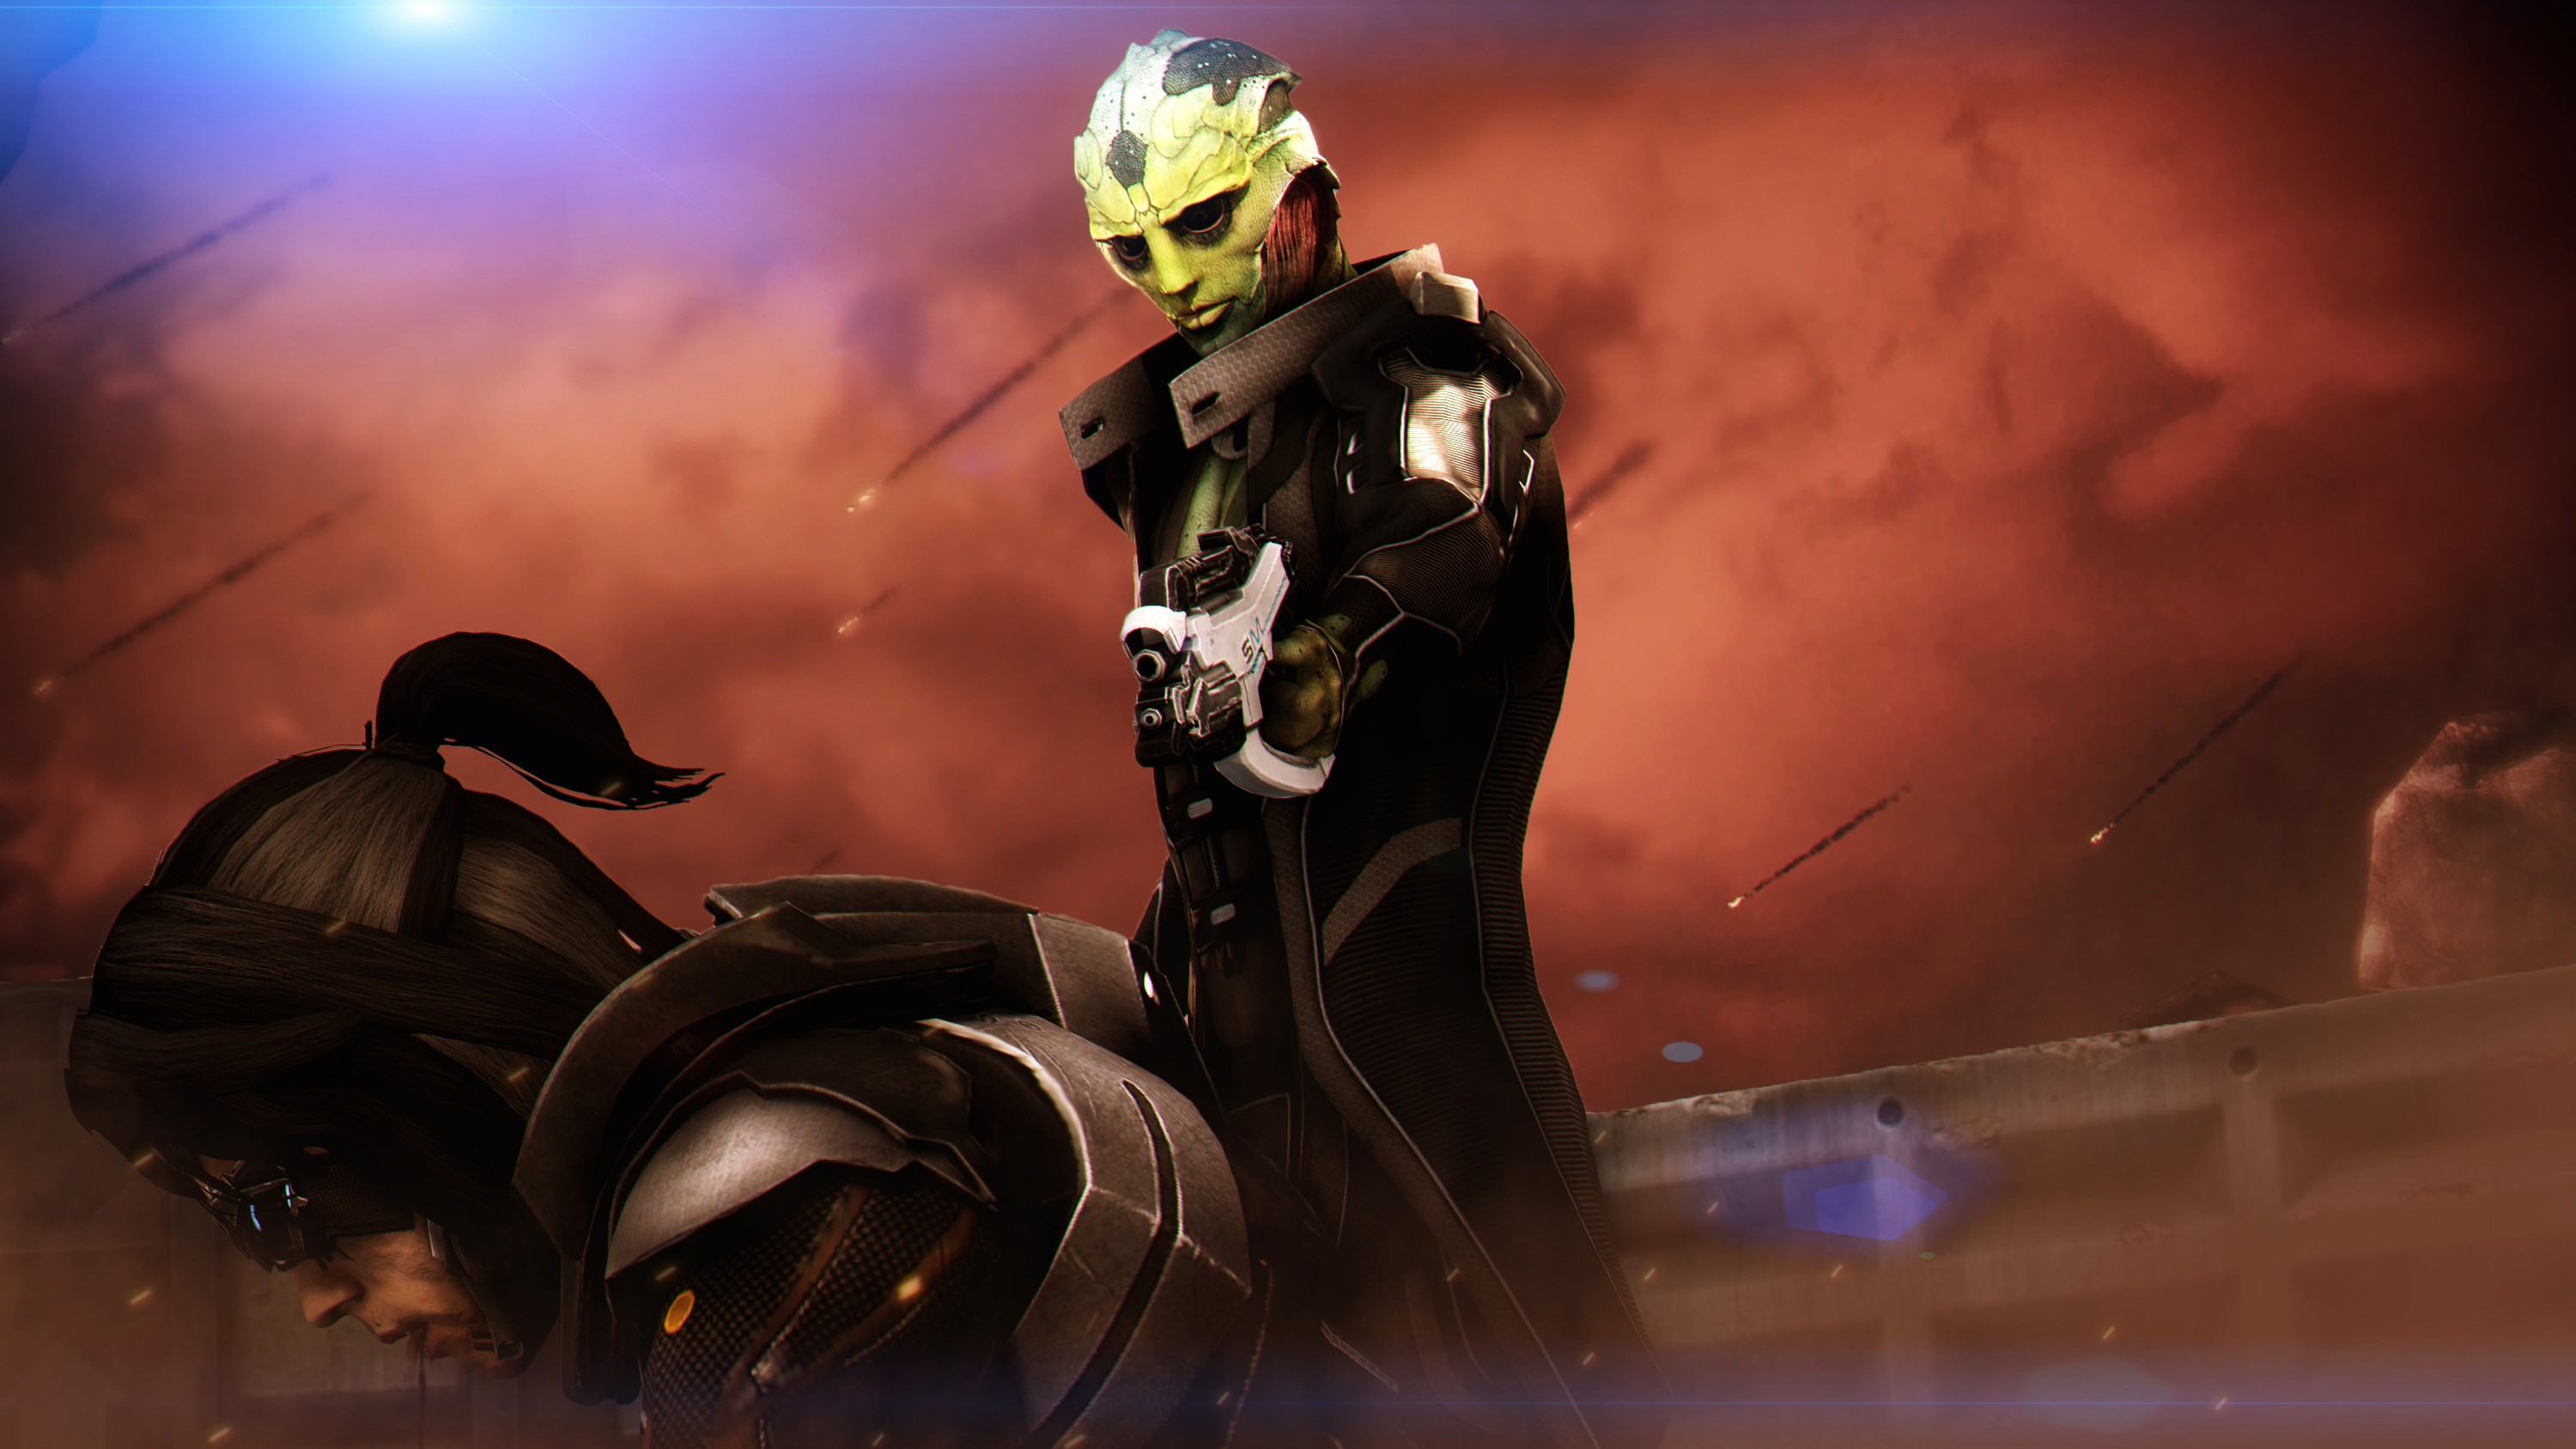 General 3000x1687 Mass Effect Thane Krios video games PC gaming science fiction weapon video game art